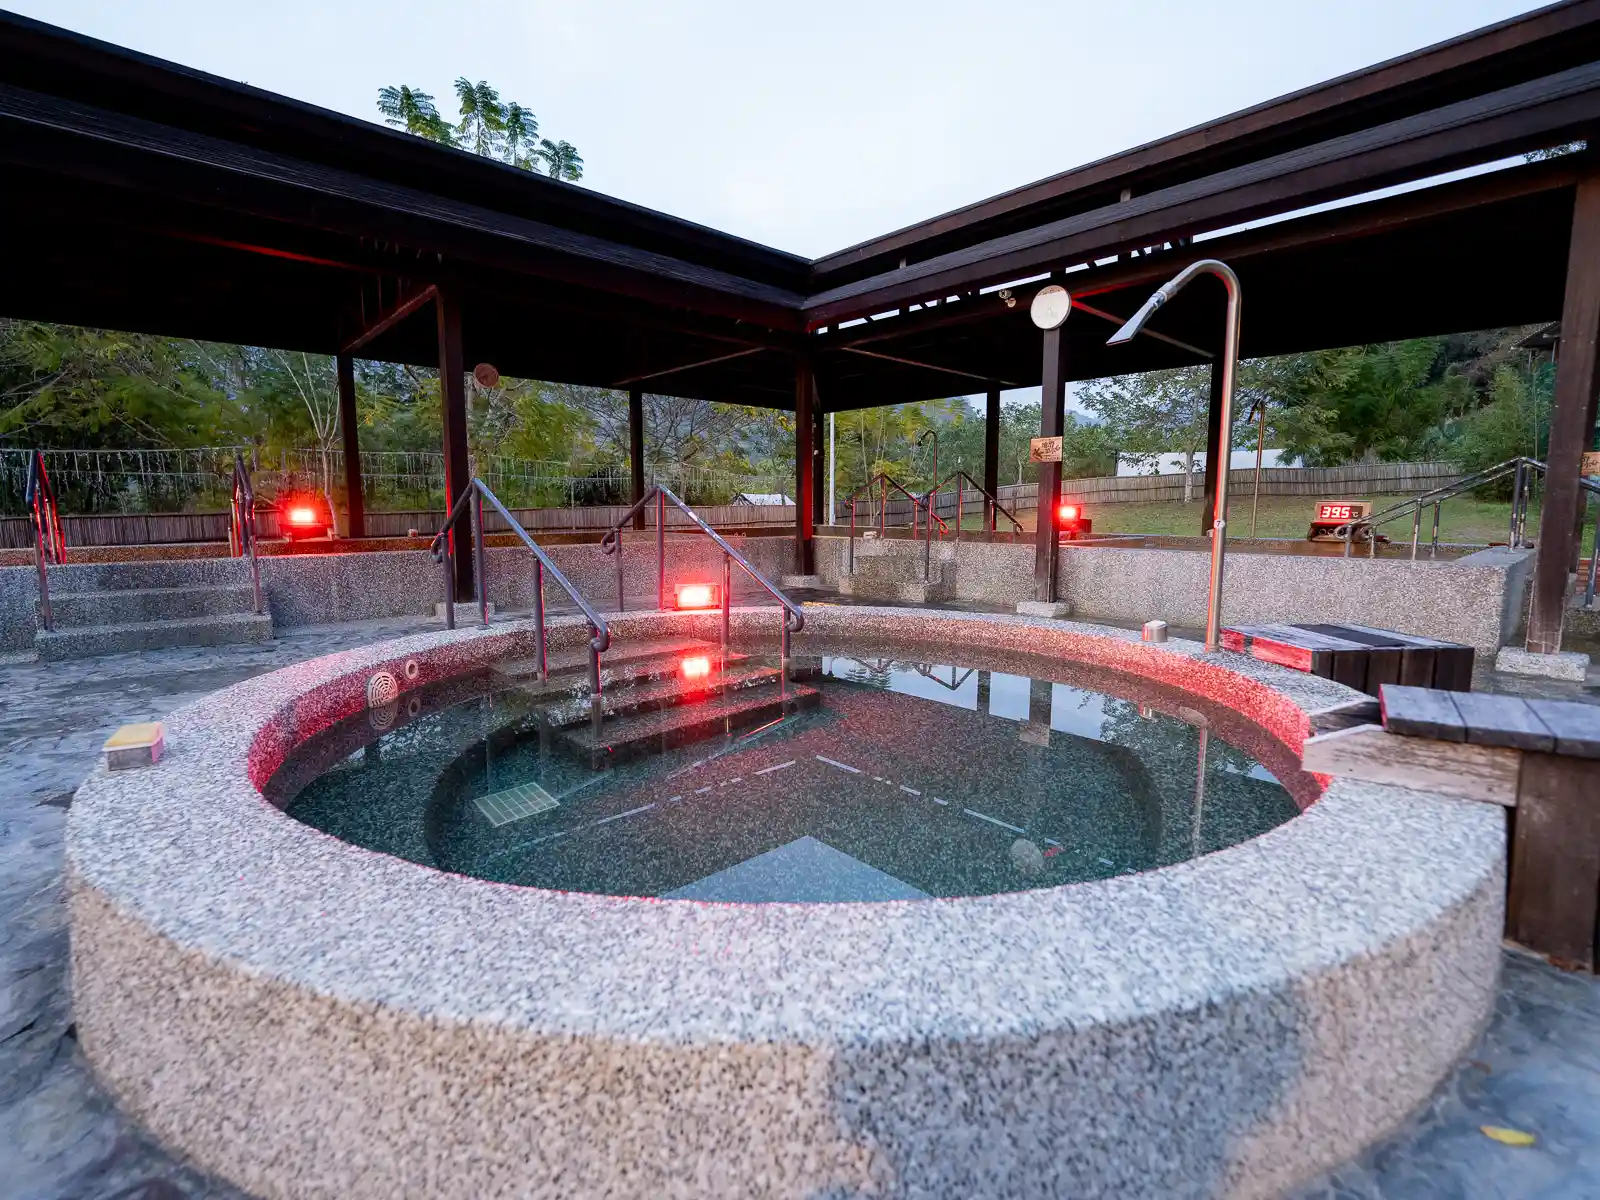 A high-pressure spa jet is aimed down at a circular hot spring pool.